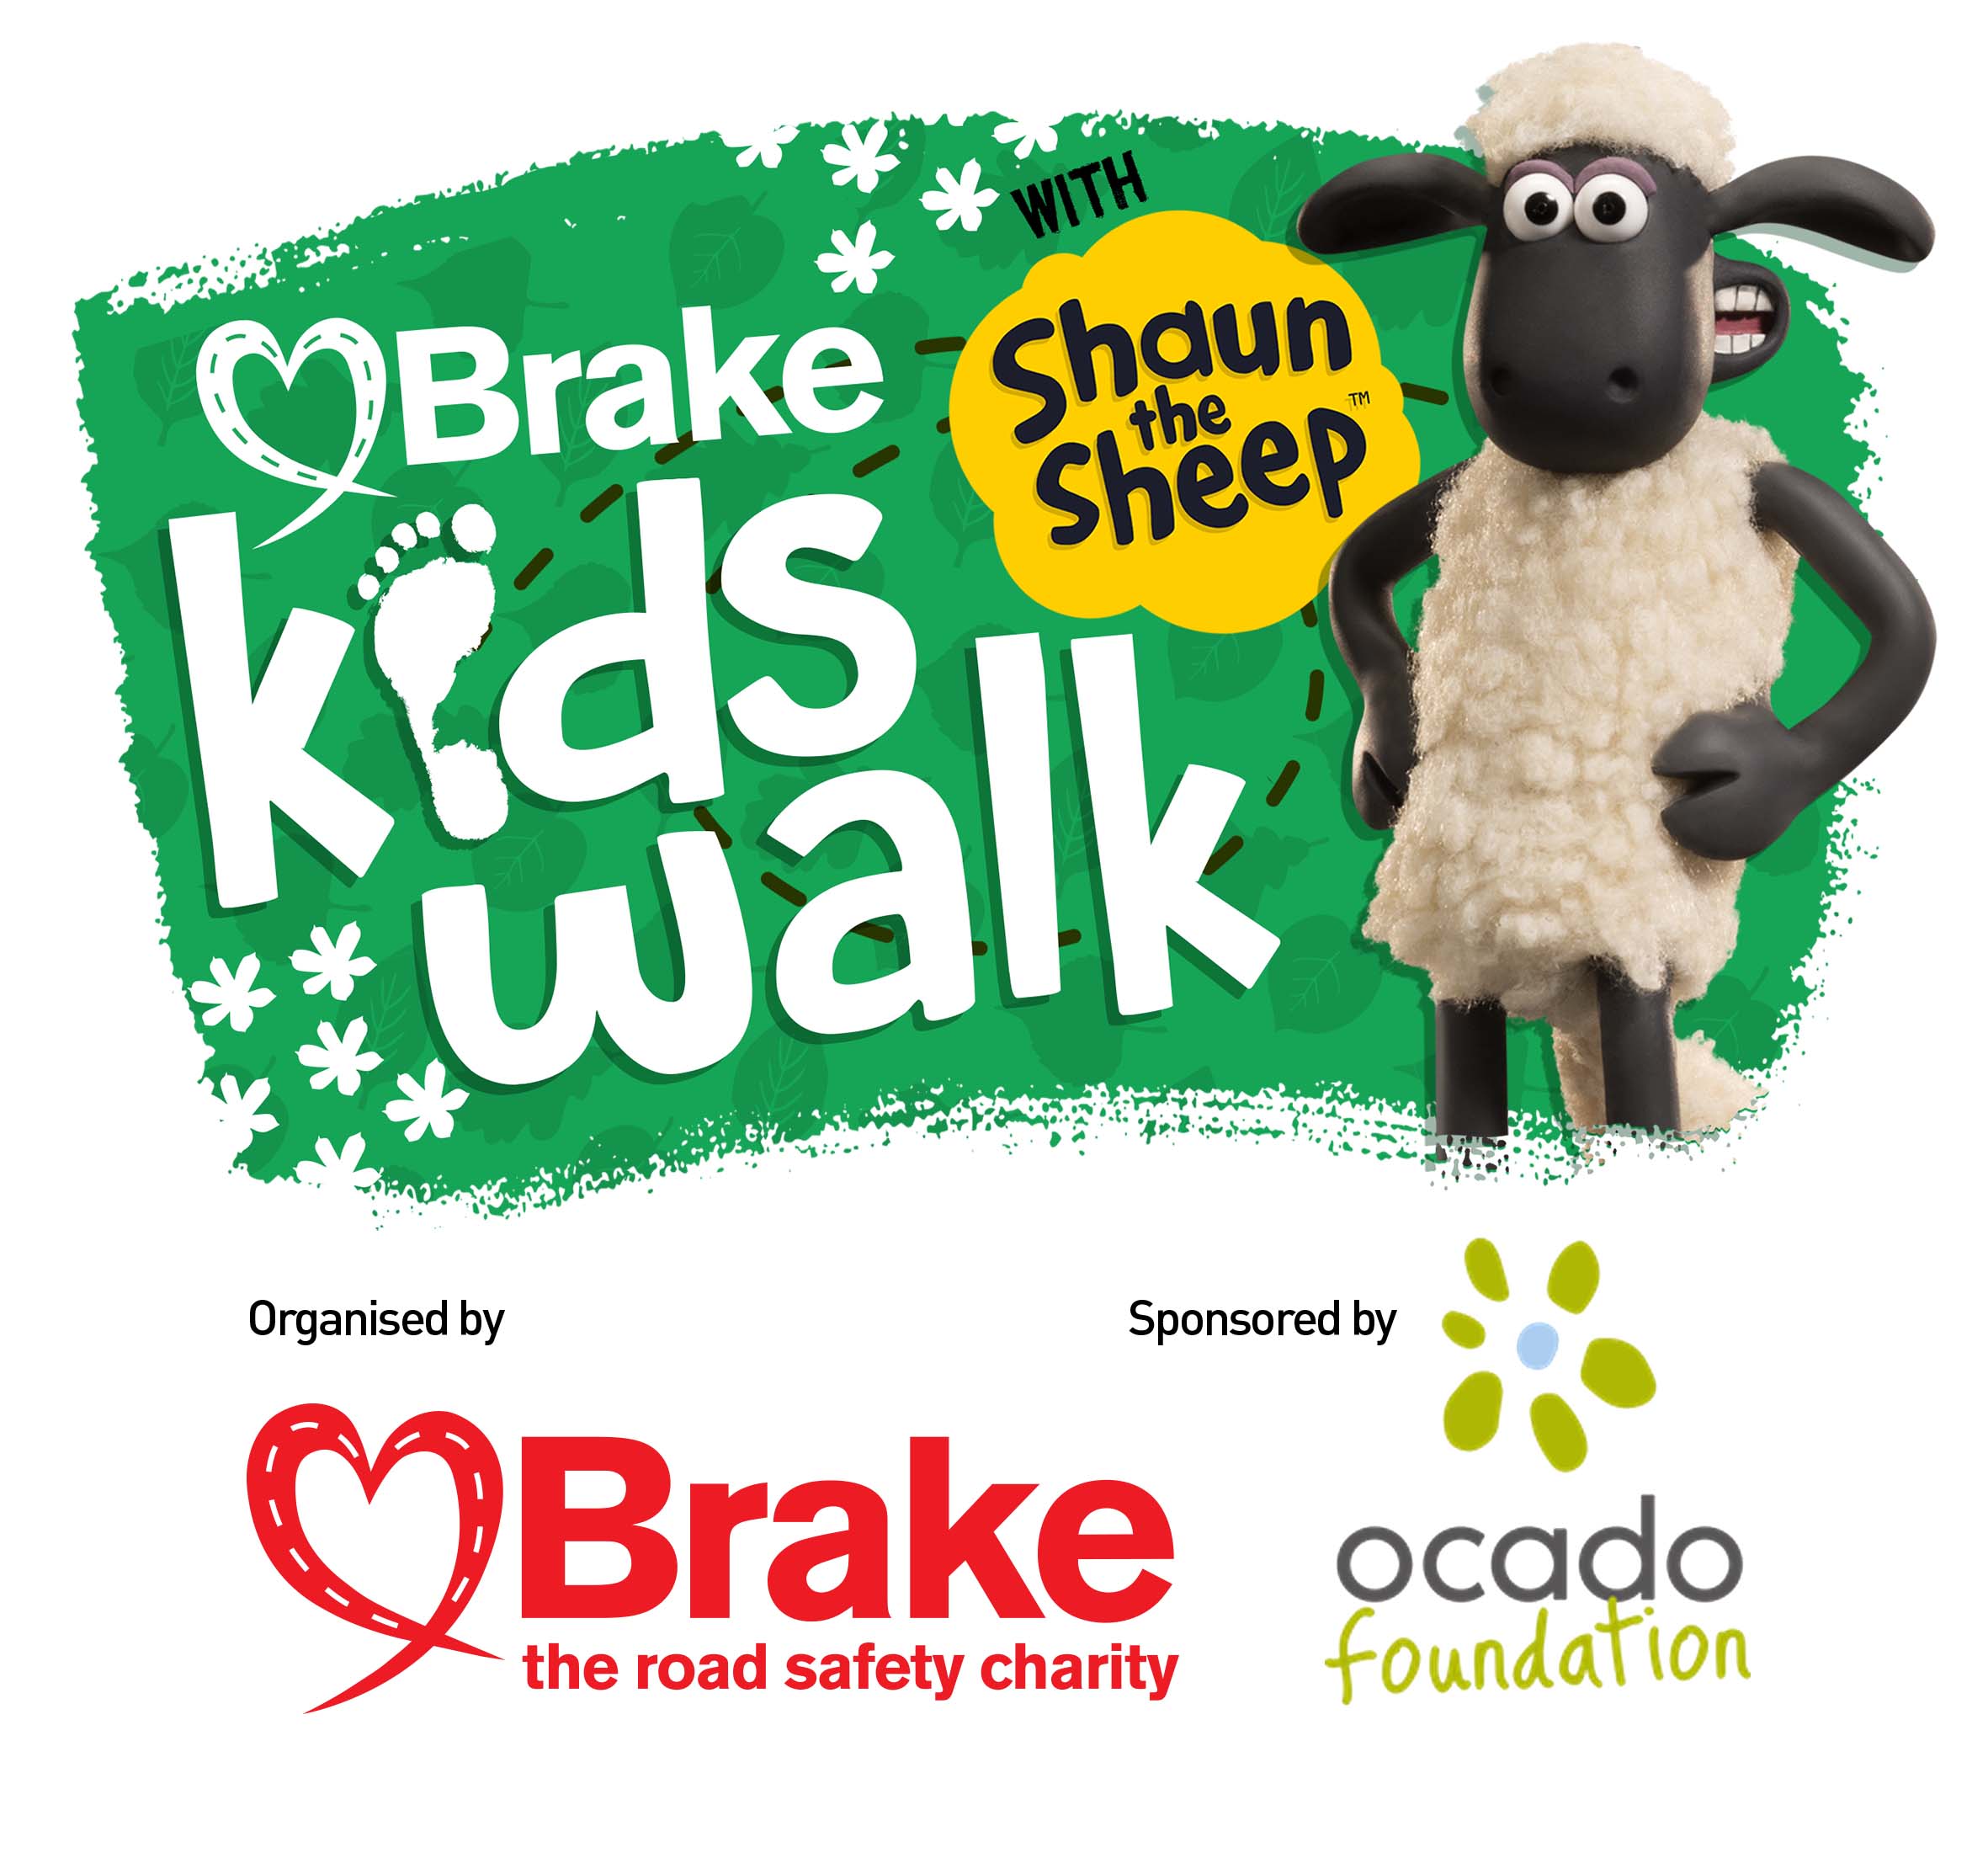 Poster for Kids Walk with Shaun the Sheep